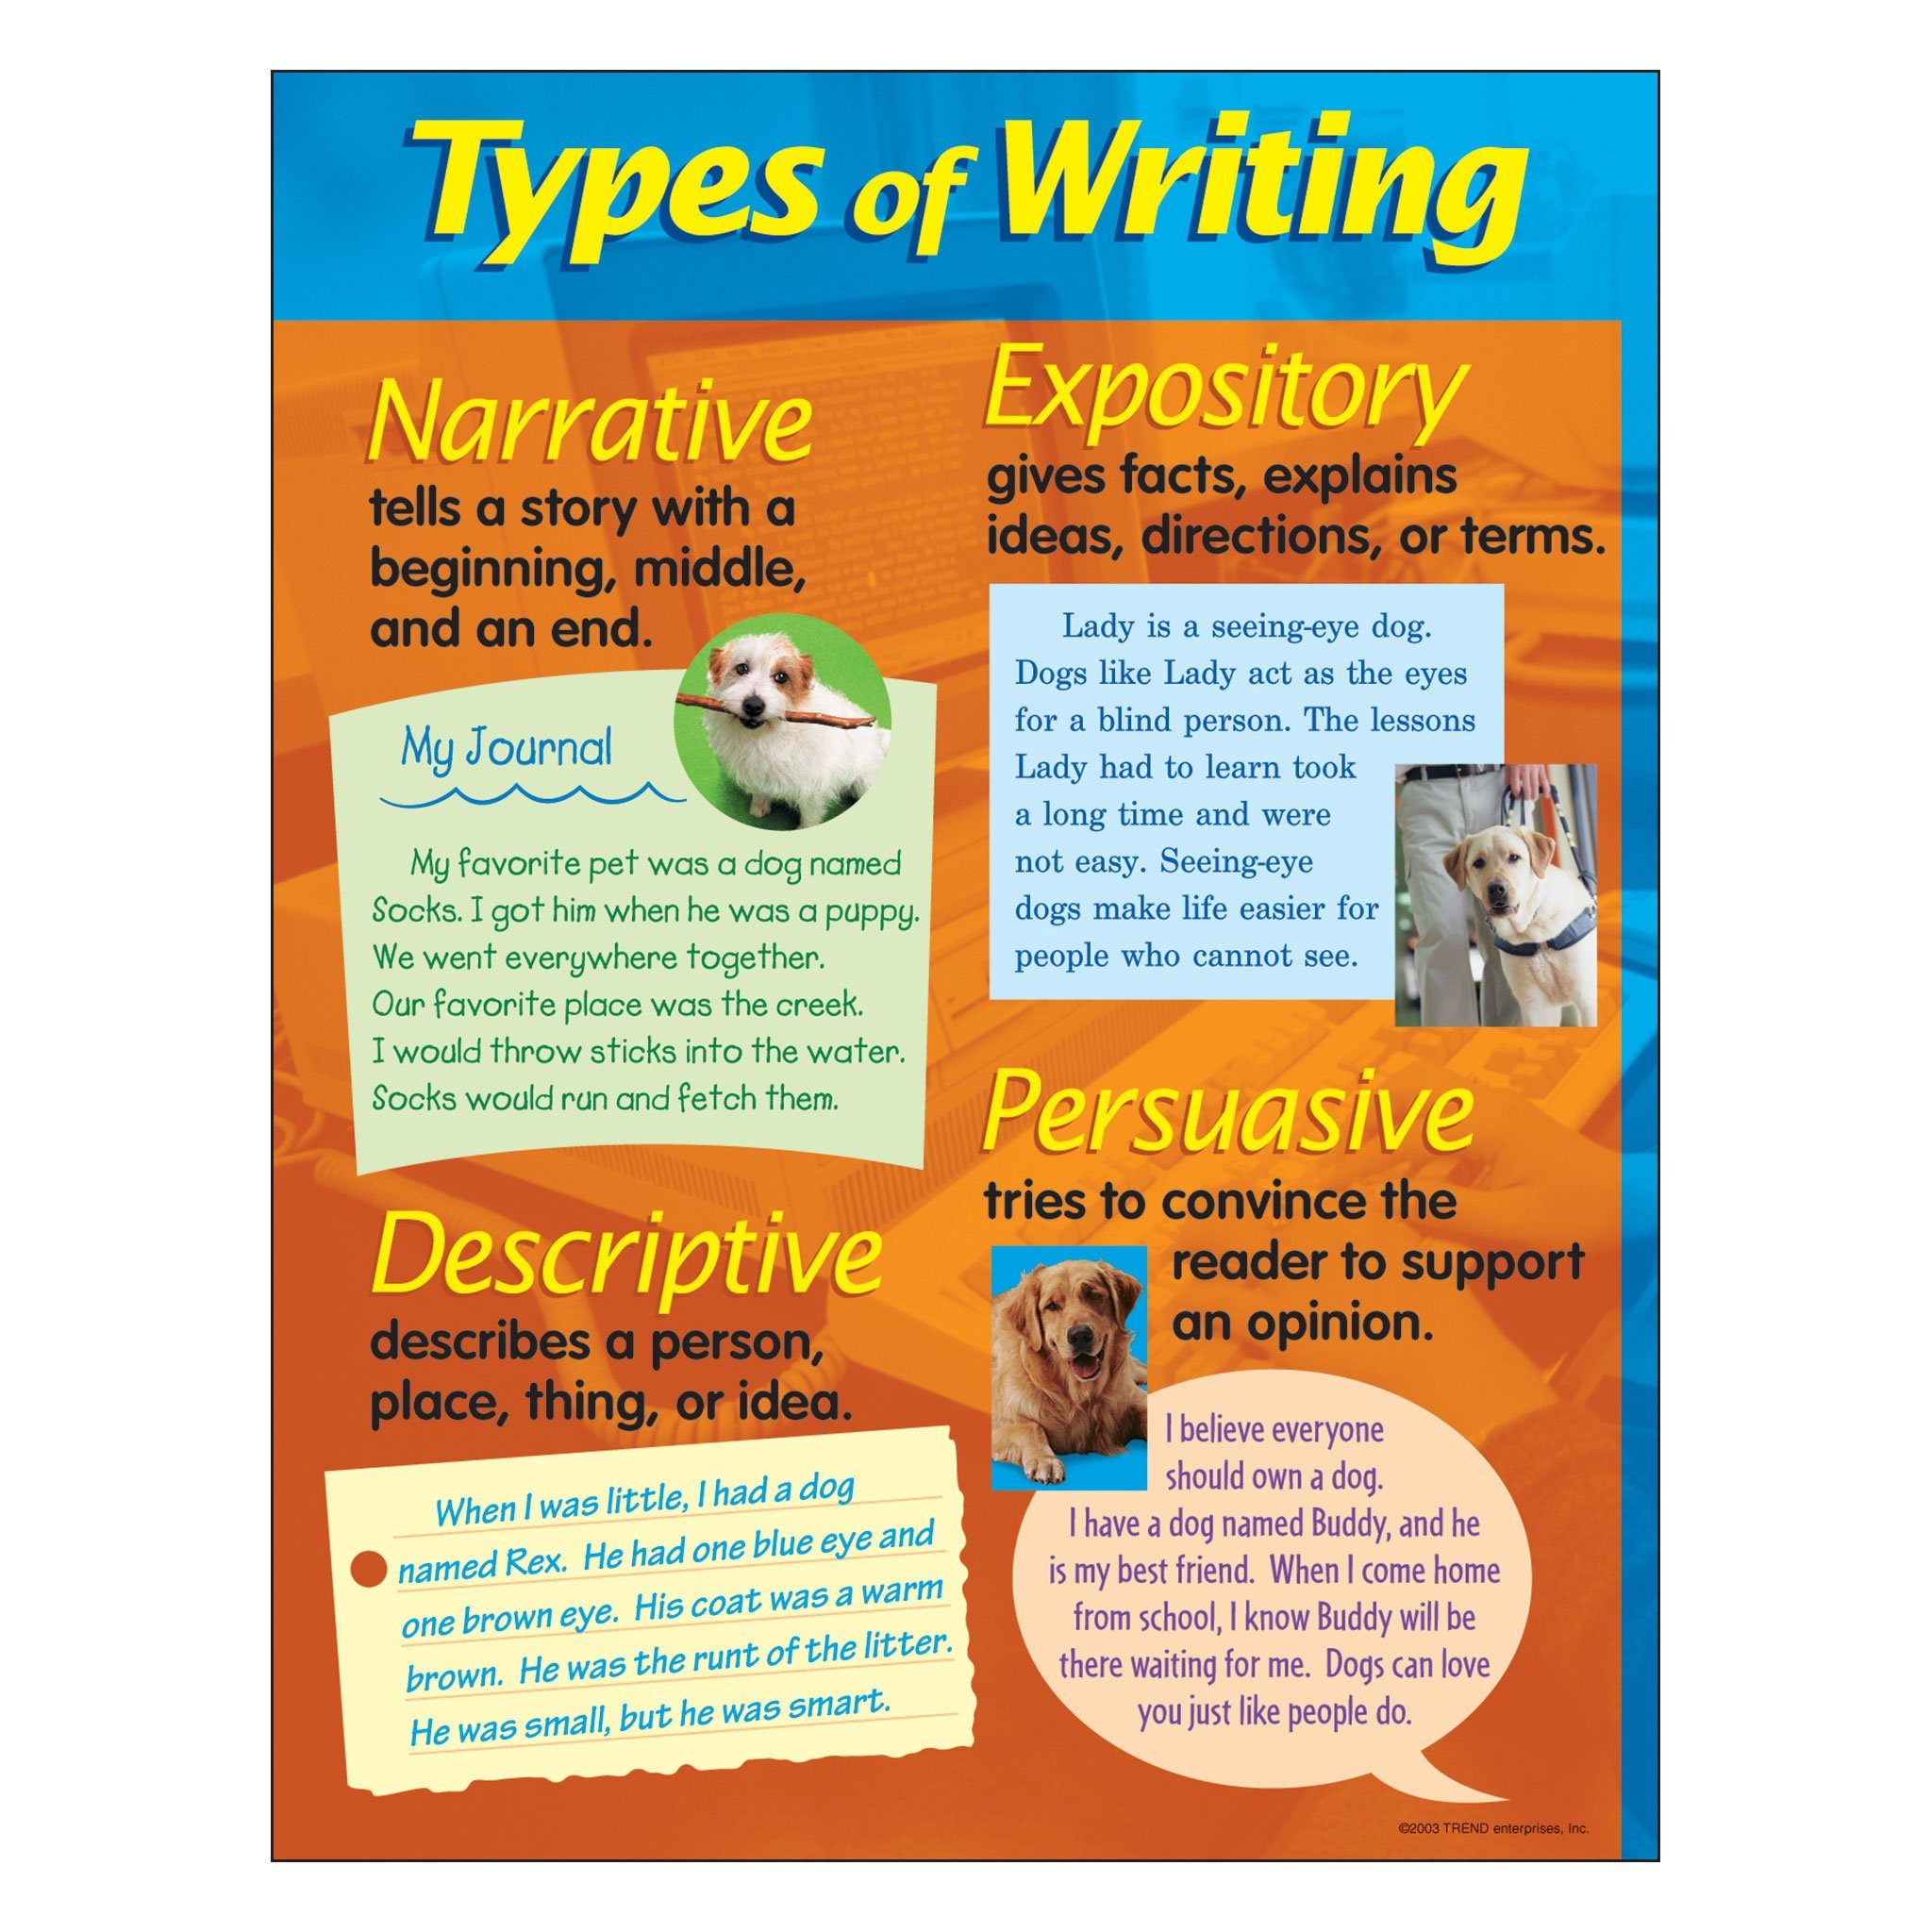 what are the 2 types of writing